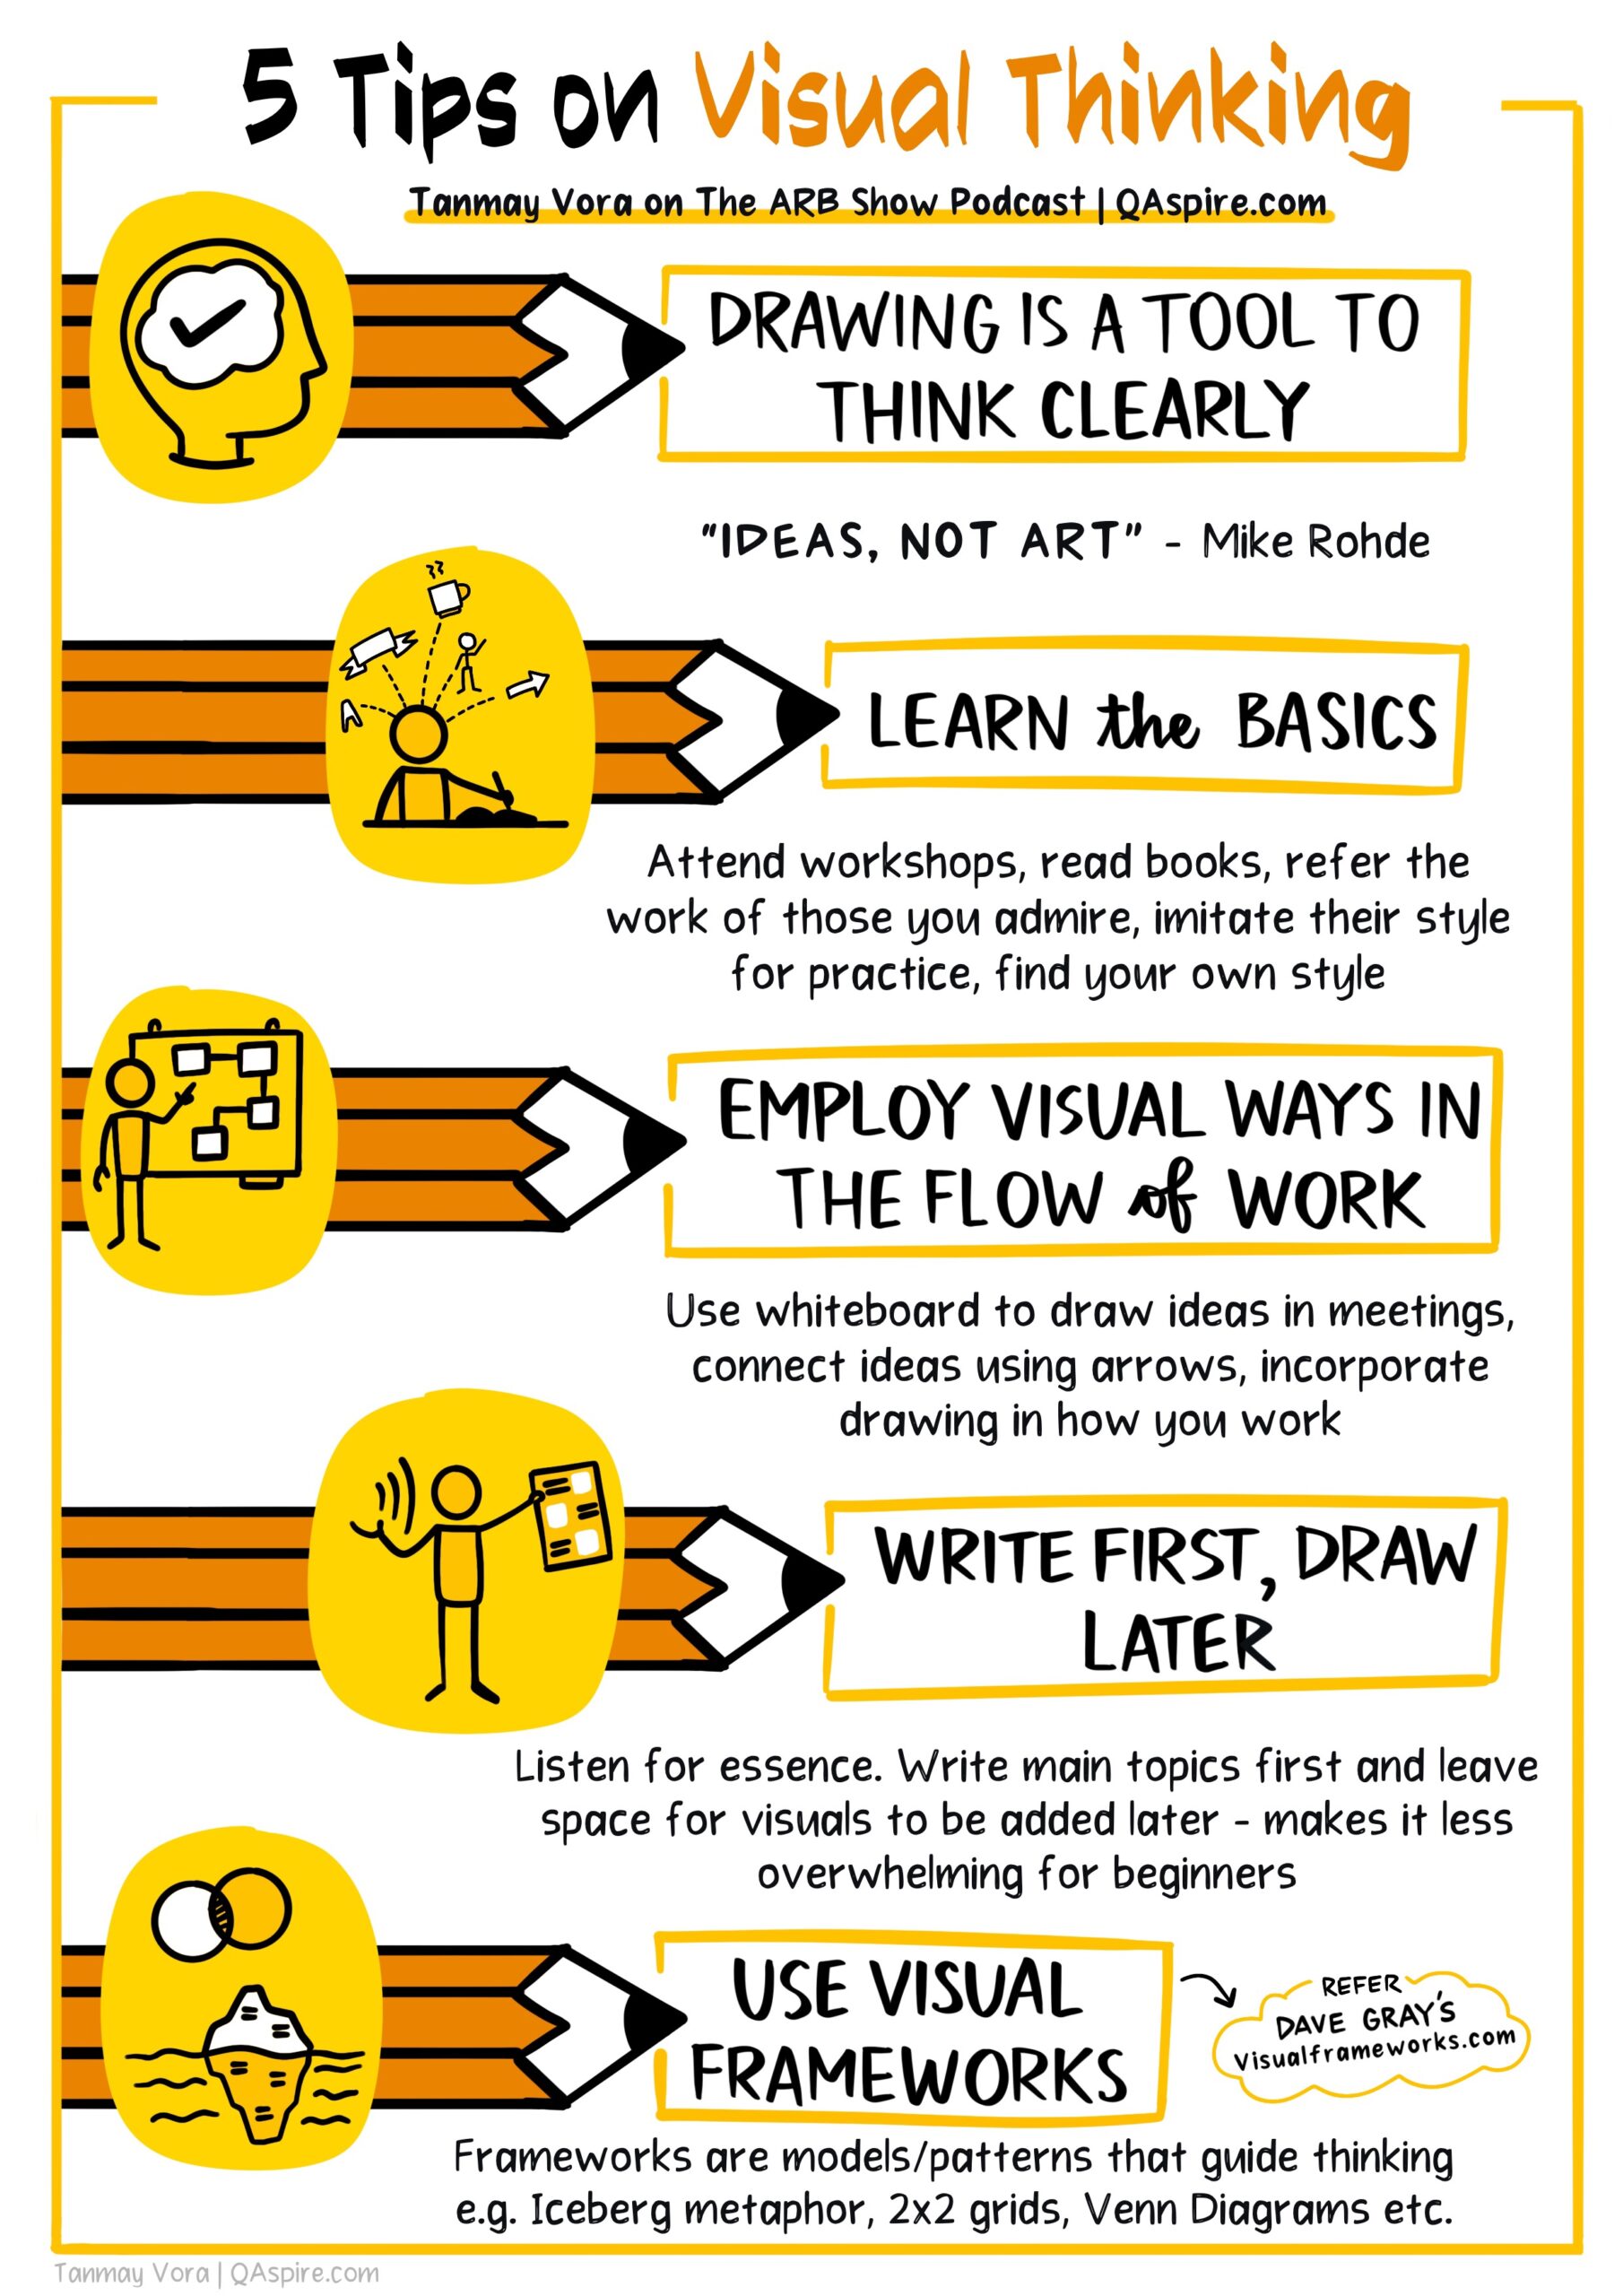 5 Tips to incorporate visual thinking in your day to day work